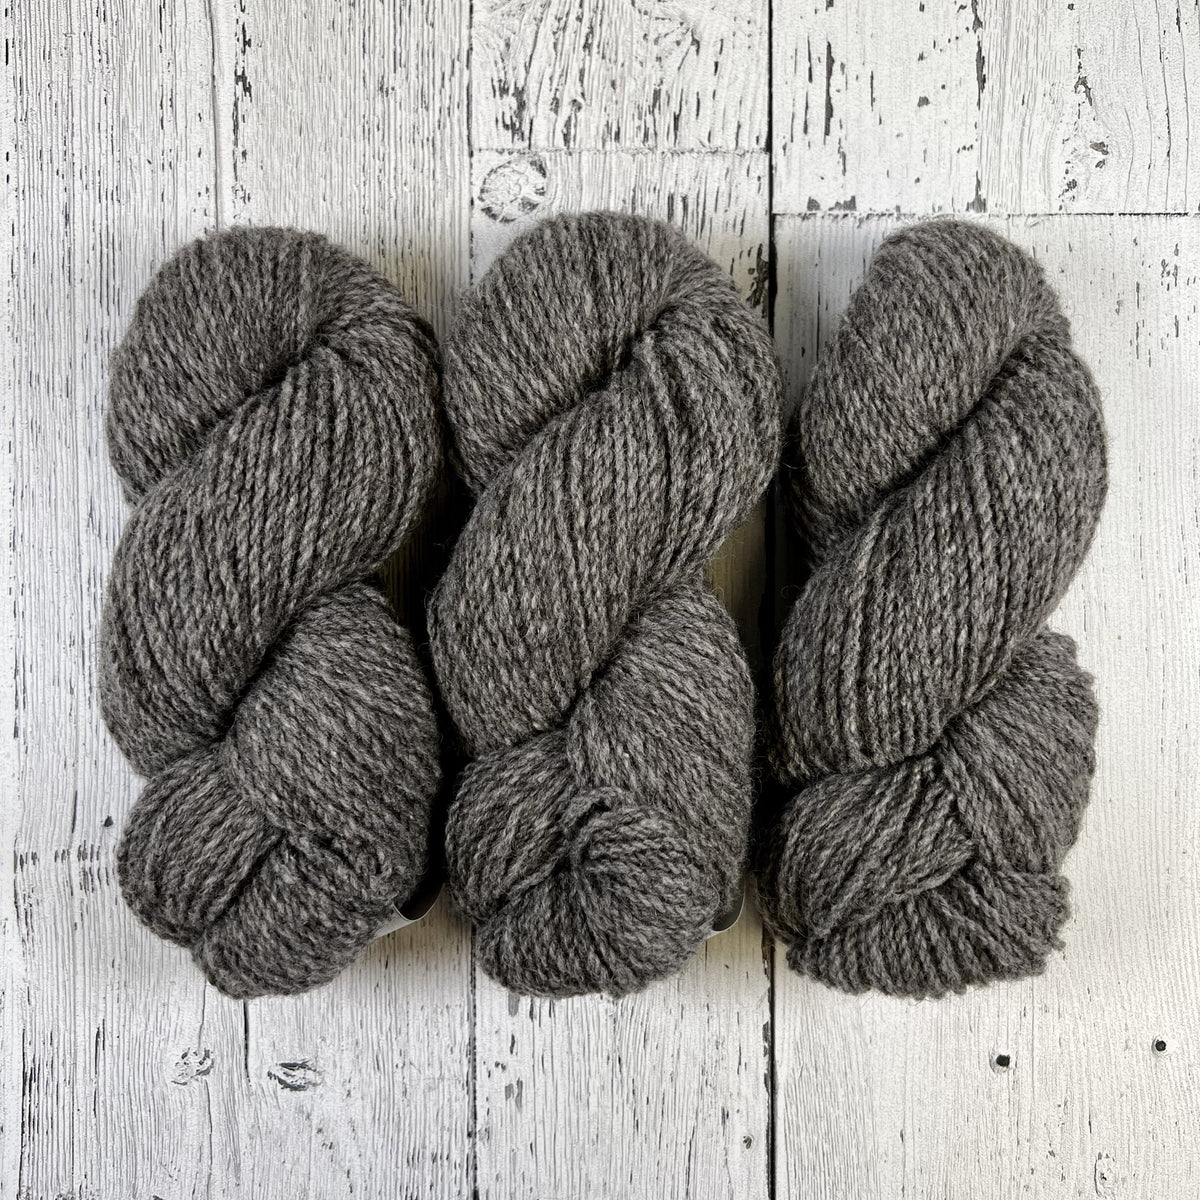 Undyed - Heritage Batch 4 Aran Weight - Dyed Stock